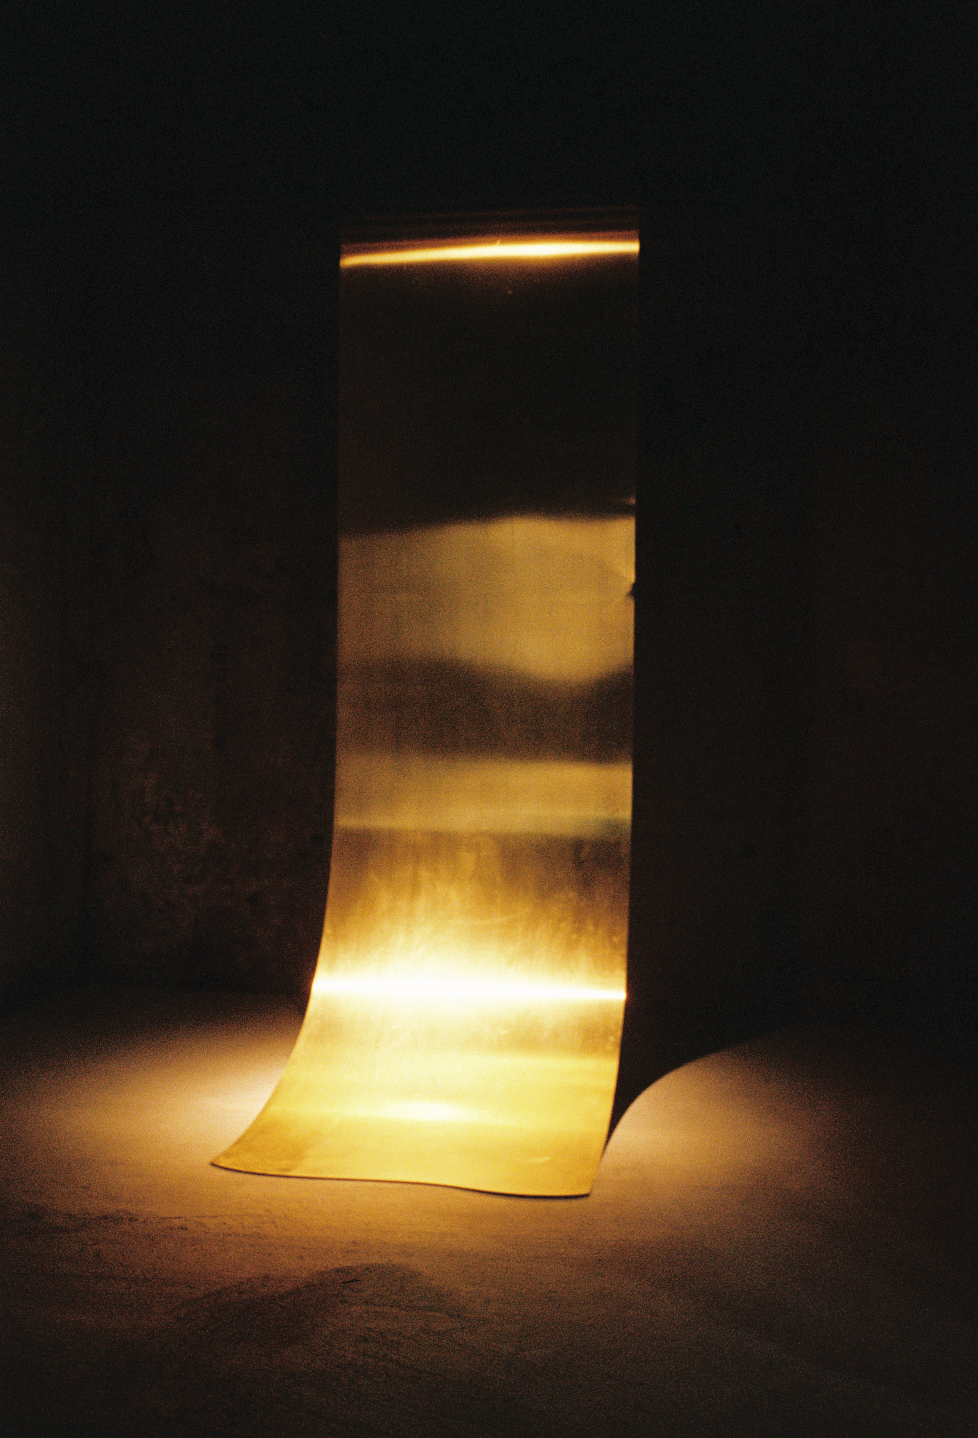 Brass instrument by Andrius Arutiunian which resonates and sounds in the space